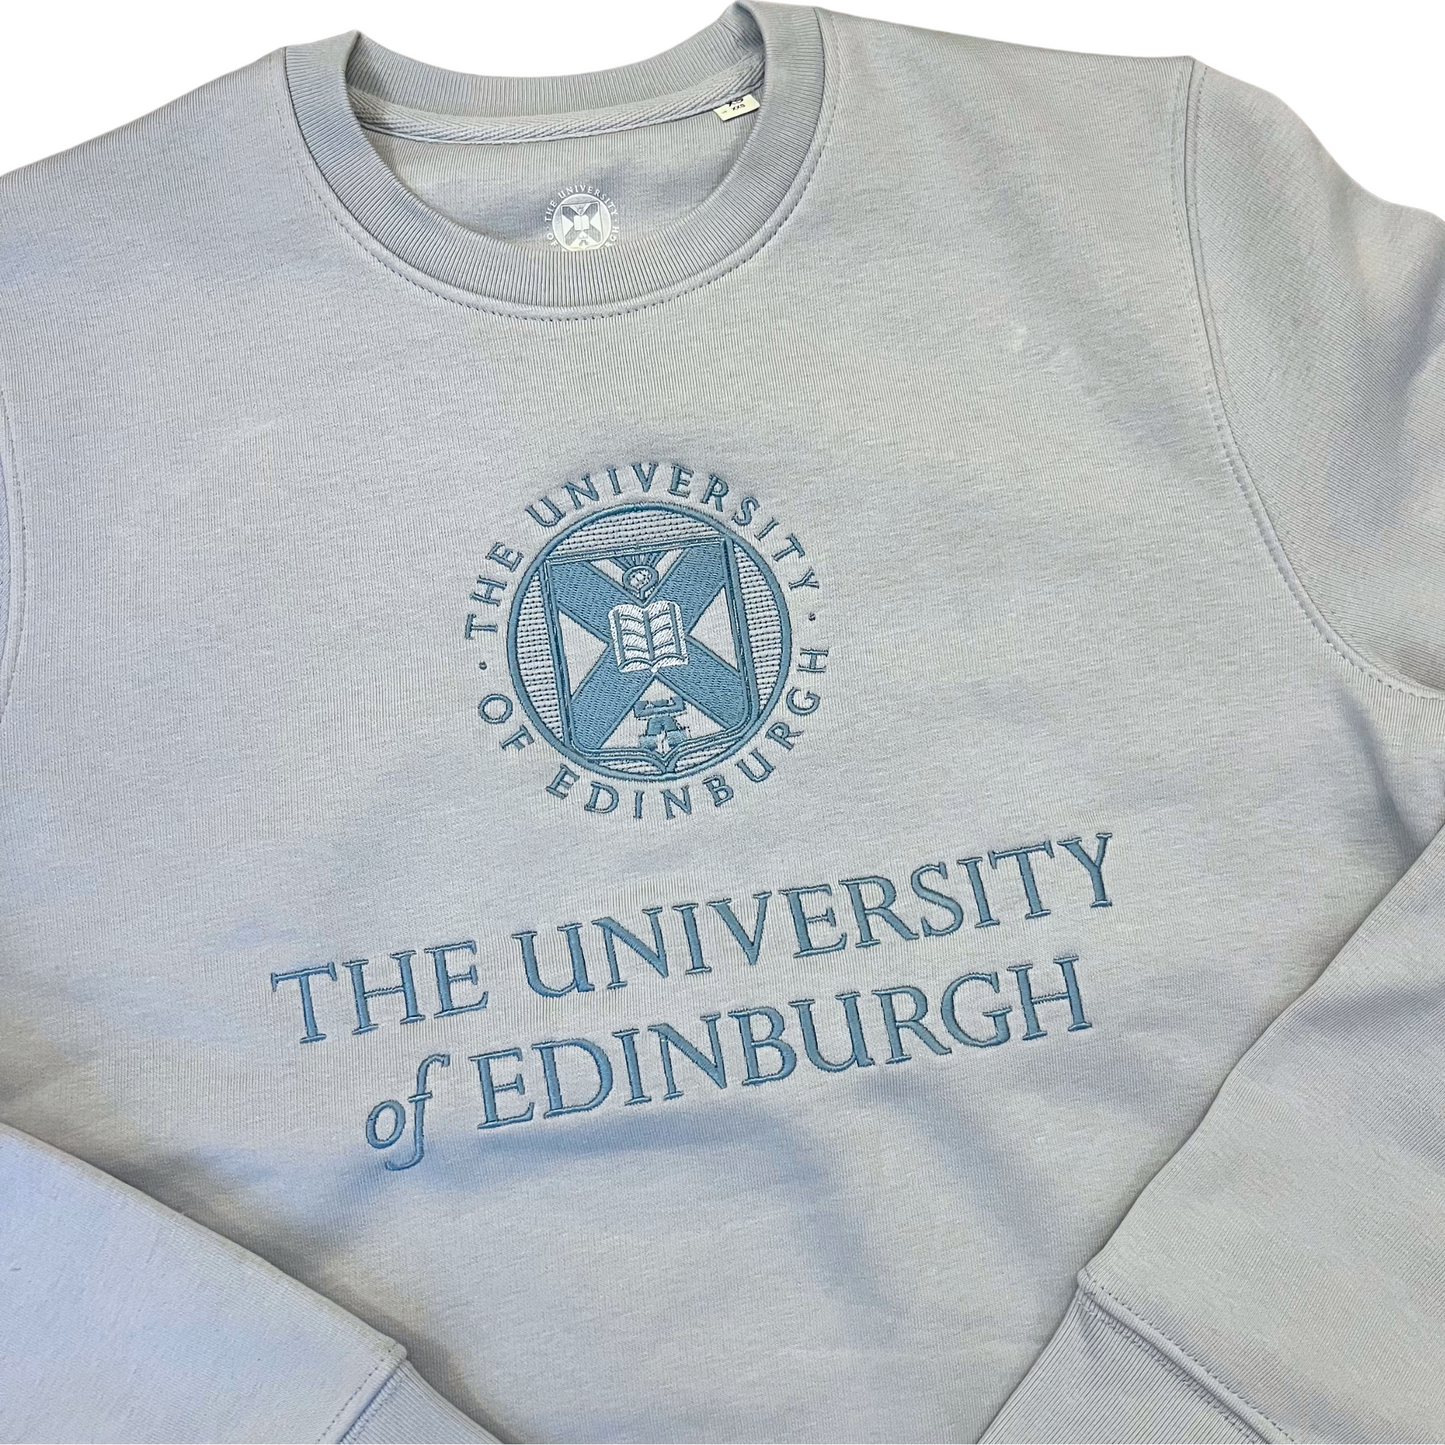 close up of blue embroidered university crest and name on the light blue tonal crewneck sweatshirt